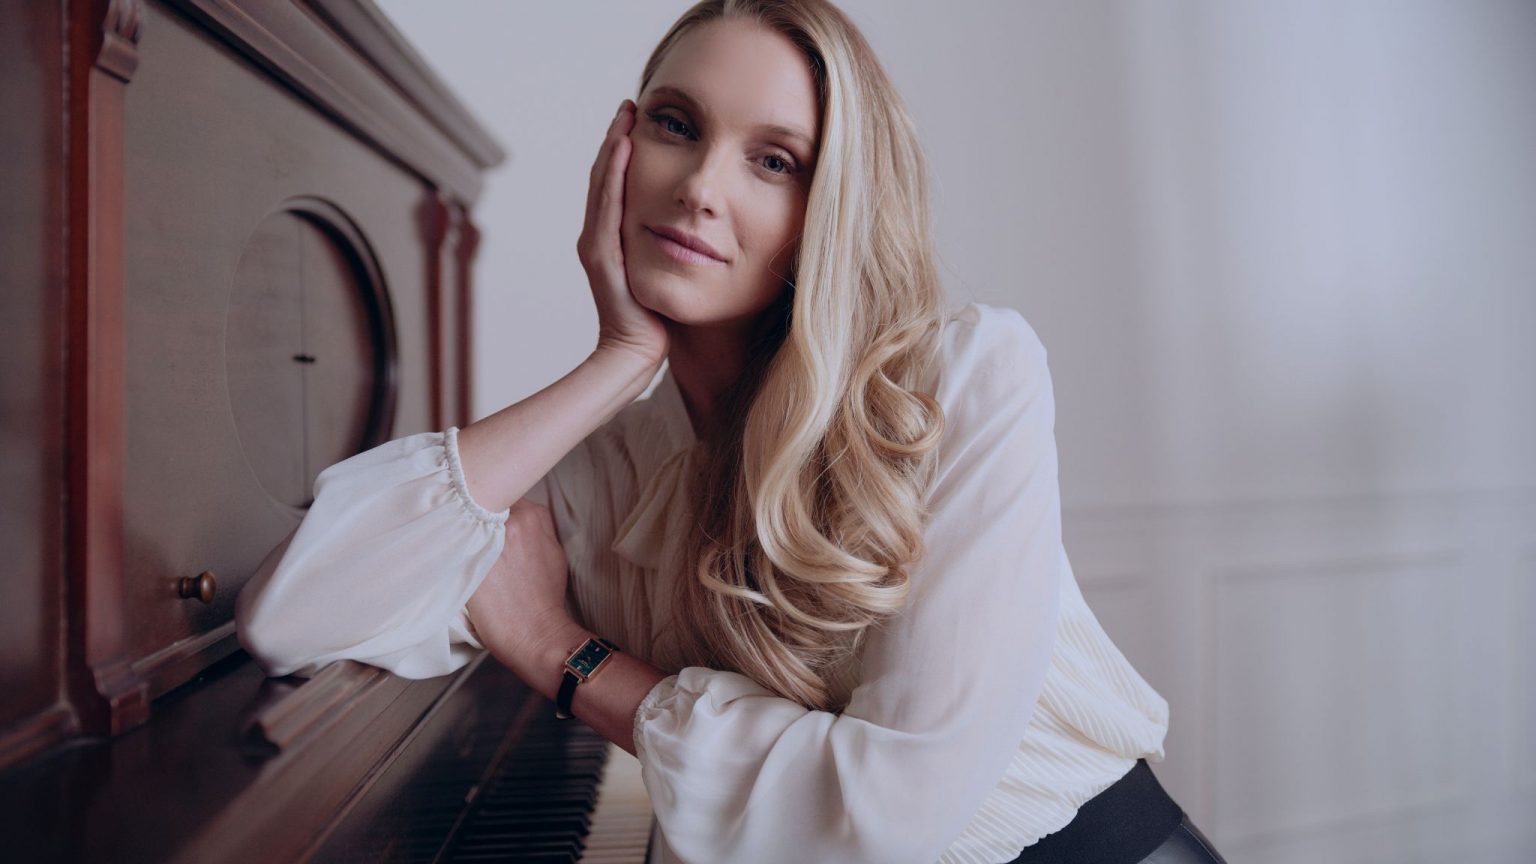 Woman With Long Blond Hair Wearing A White Top Posing For The Camera Leaning Against A Piano Sitting Down Wearing A Watch